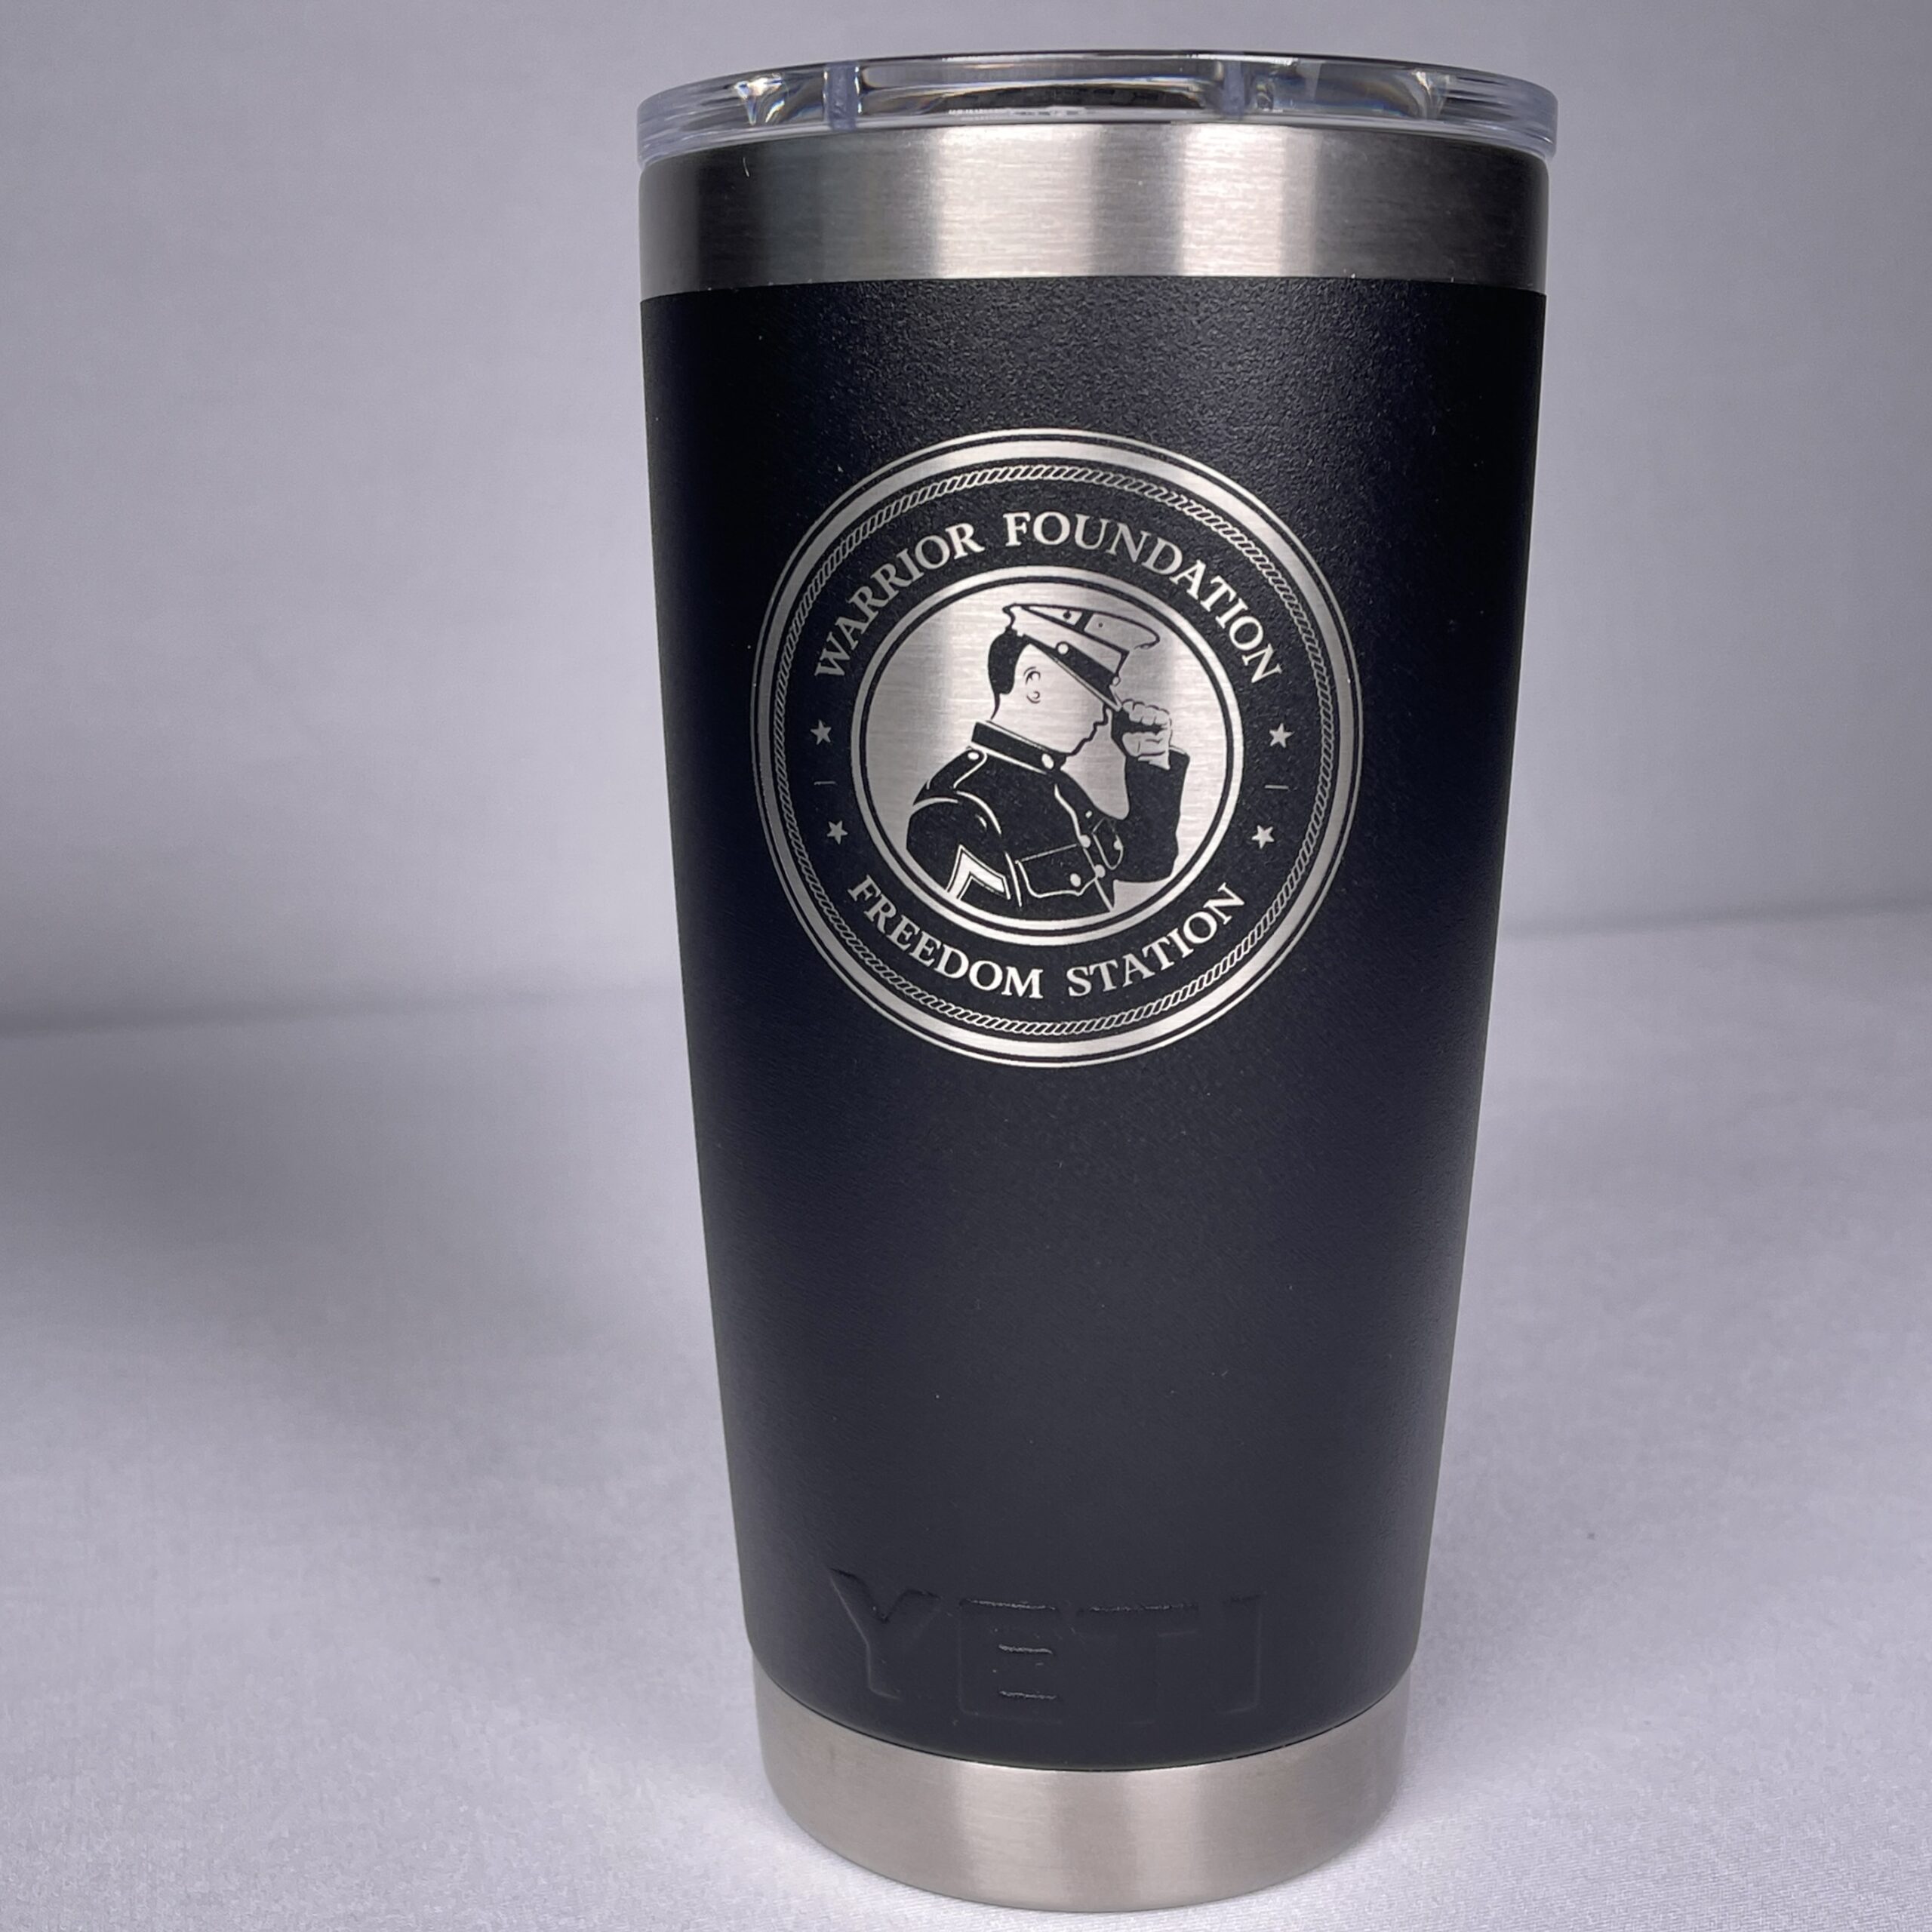 YETI ☕️ 40-OUNCE BLACK METAL HOT/COLD BEVERAGE TRAVEL TUMBLER CUP